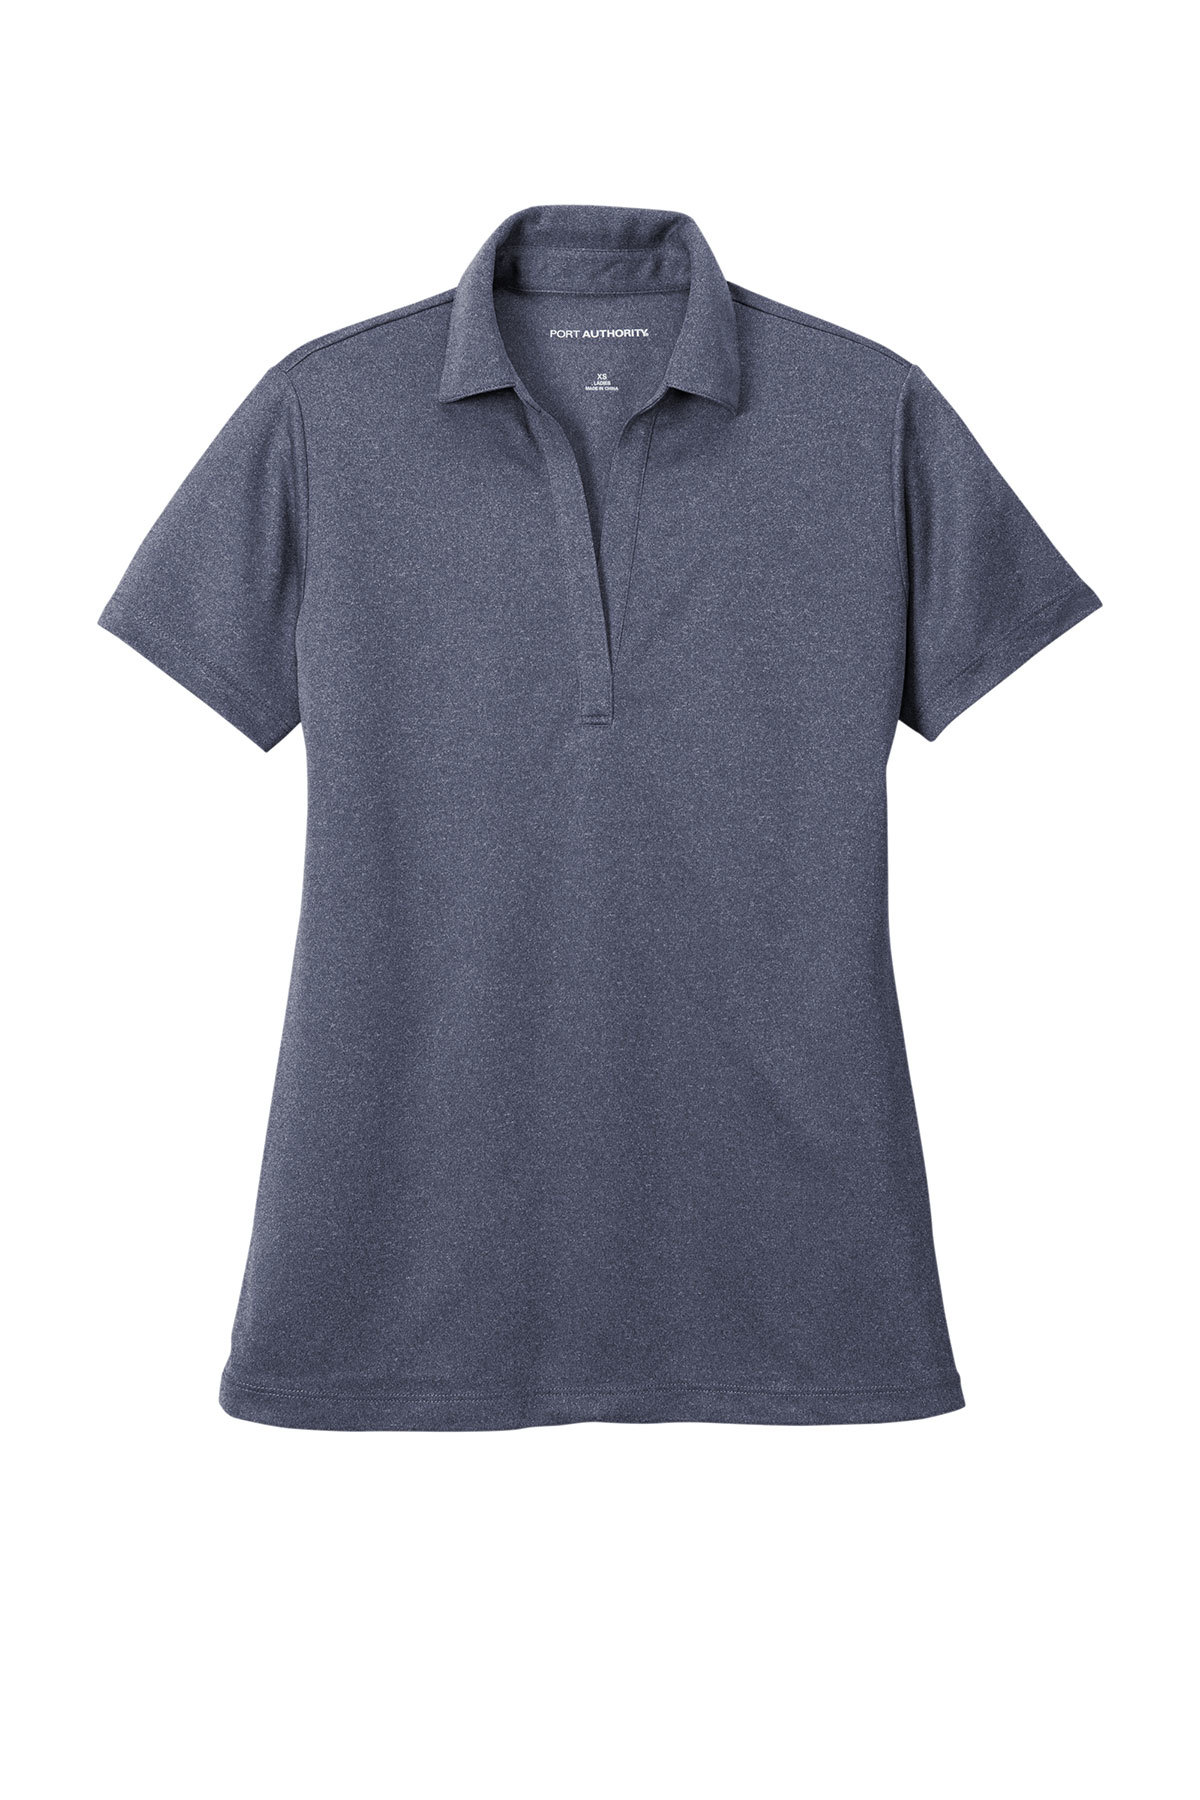 Port | Touch | Authority Product Performance Authority Port Polo Silk Heathered Ladies